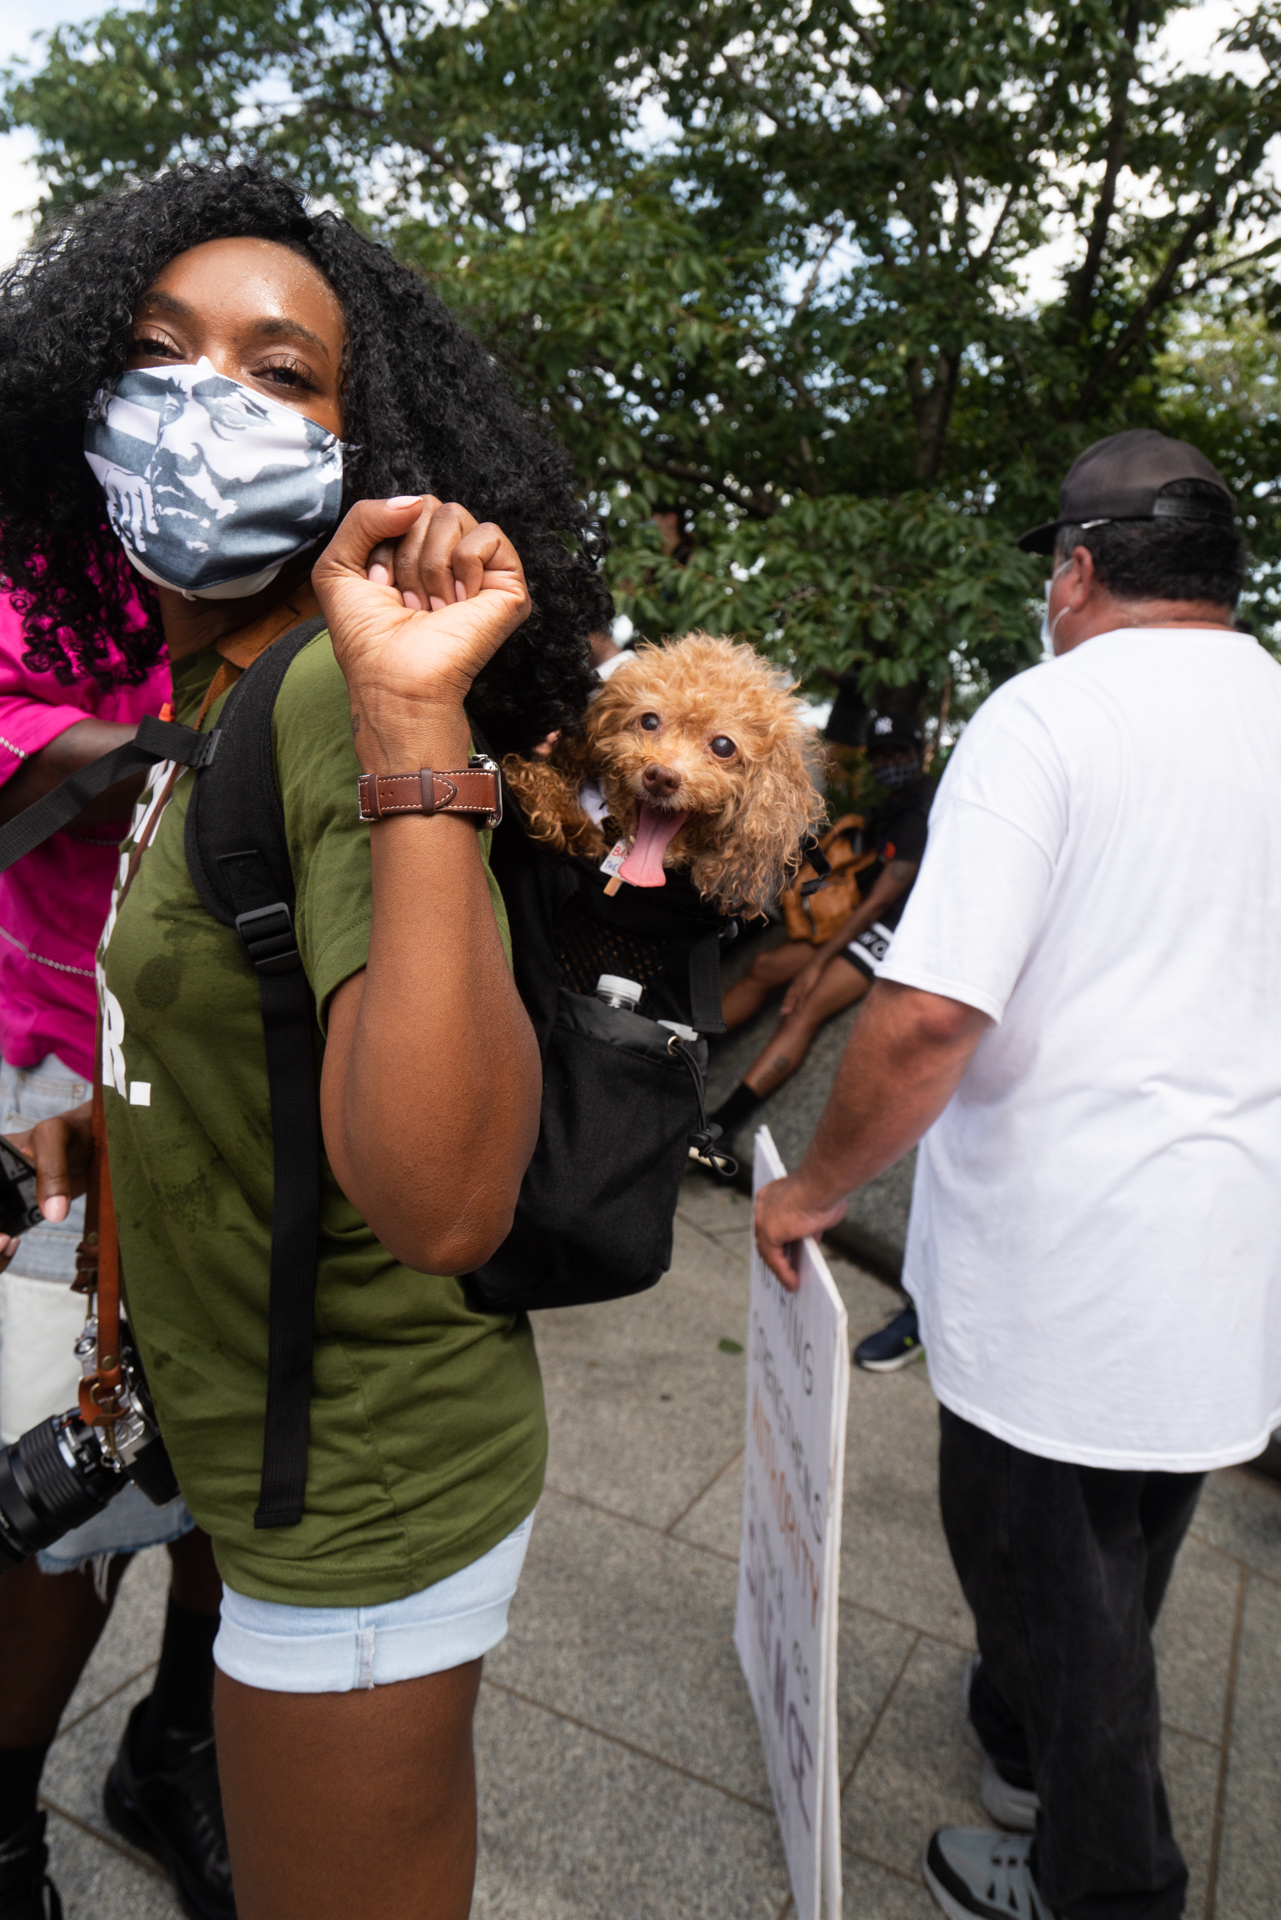 commitment march on washington, al sharpton walk, national action network, march, social justice, al sharpton, toy poodle, dogs, washington dc, tidal basin, martin luther king jr memorial, national mall